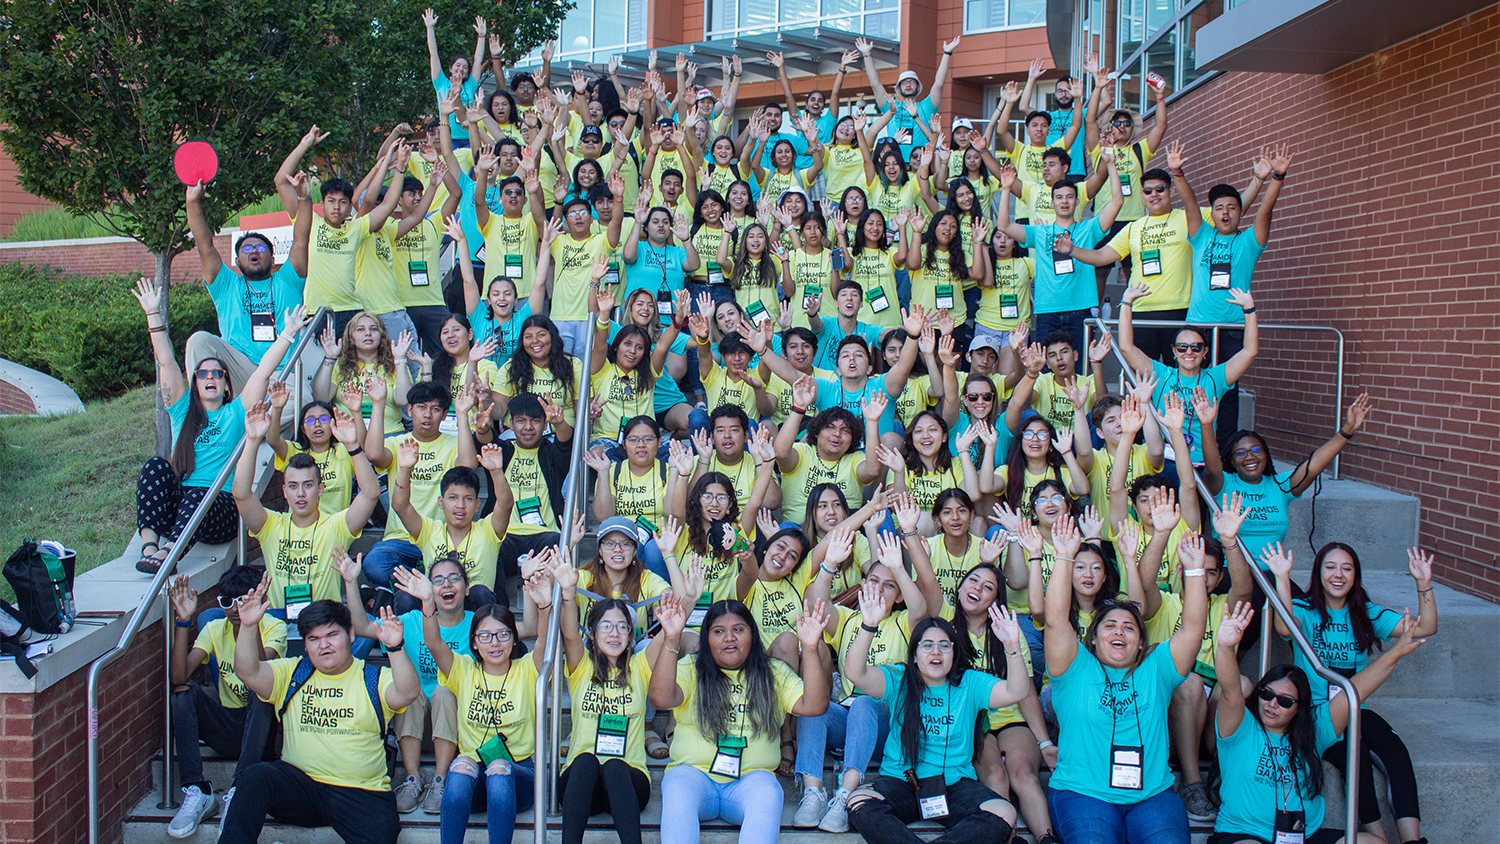 A large group of students in teal and yellow shirts raising their hands